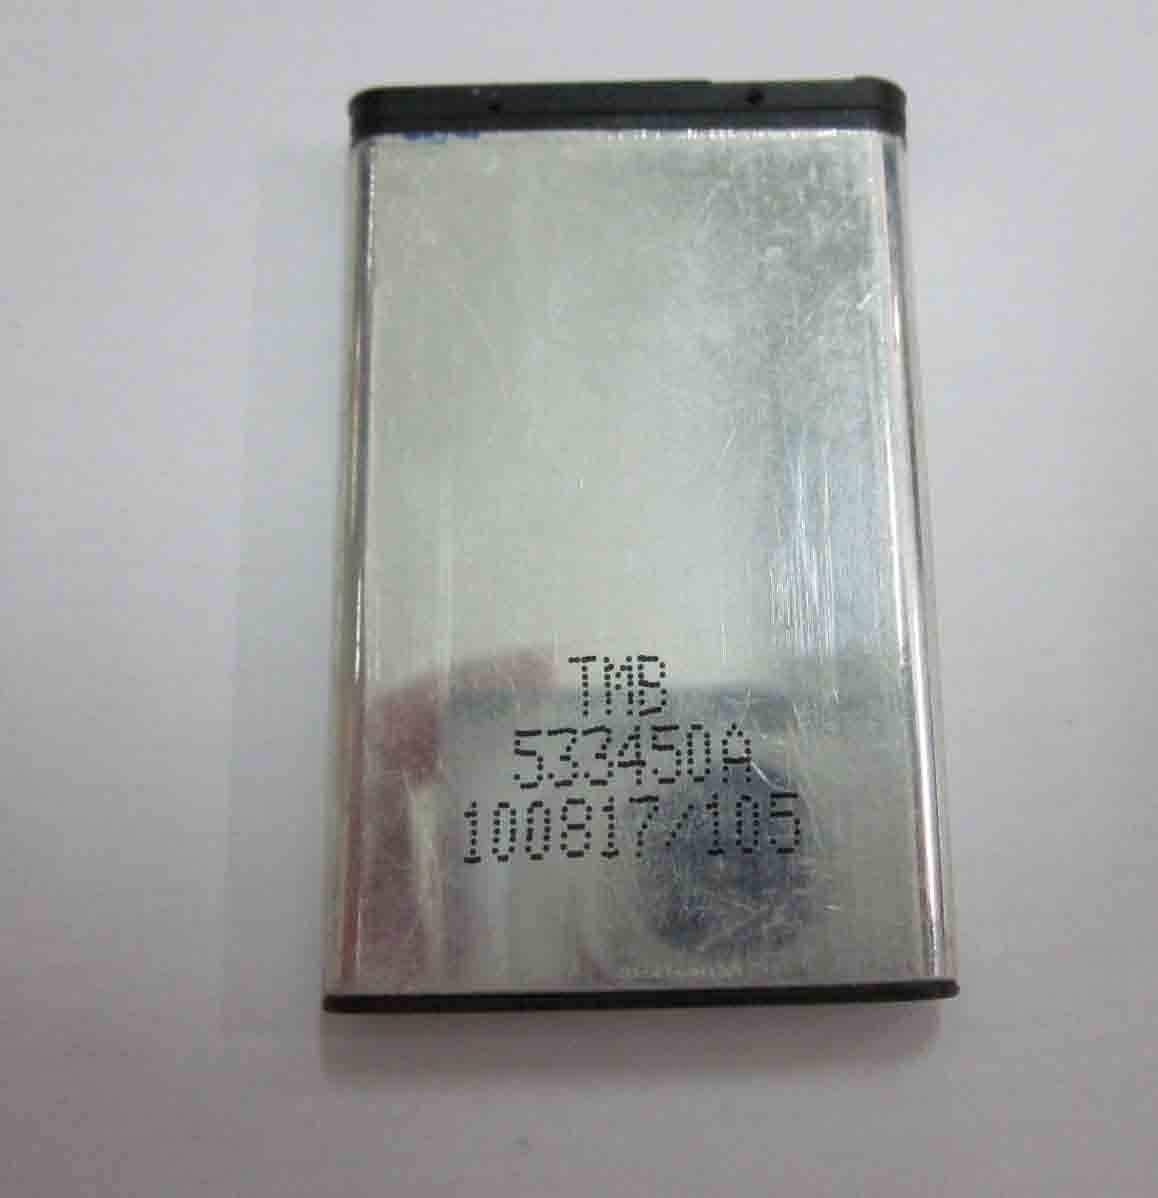 mobile phone battery (with TMB cell) - Zhongshan Tianmao Battery Co ...